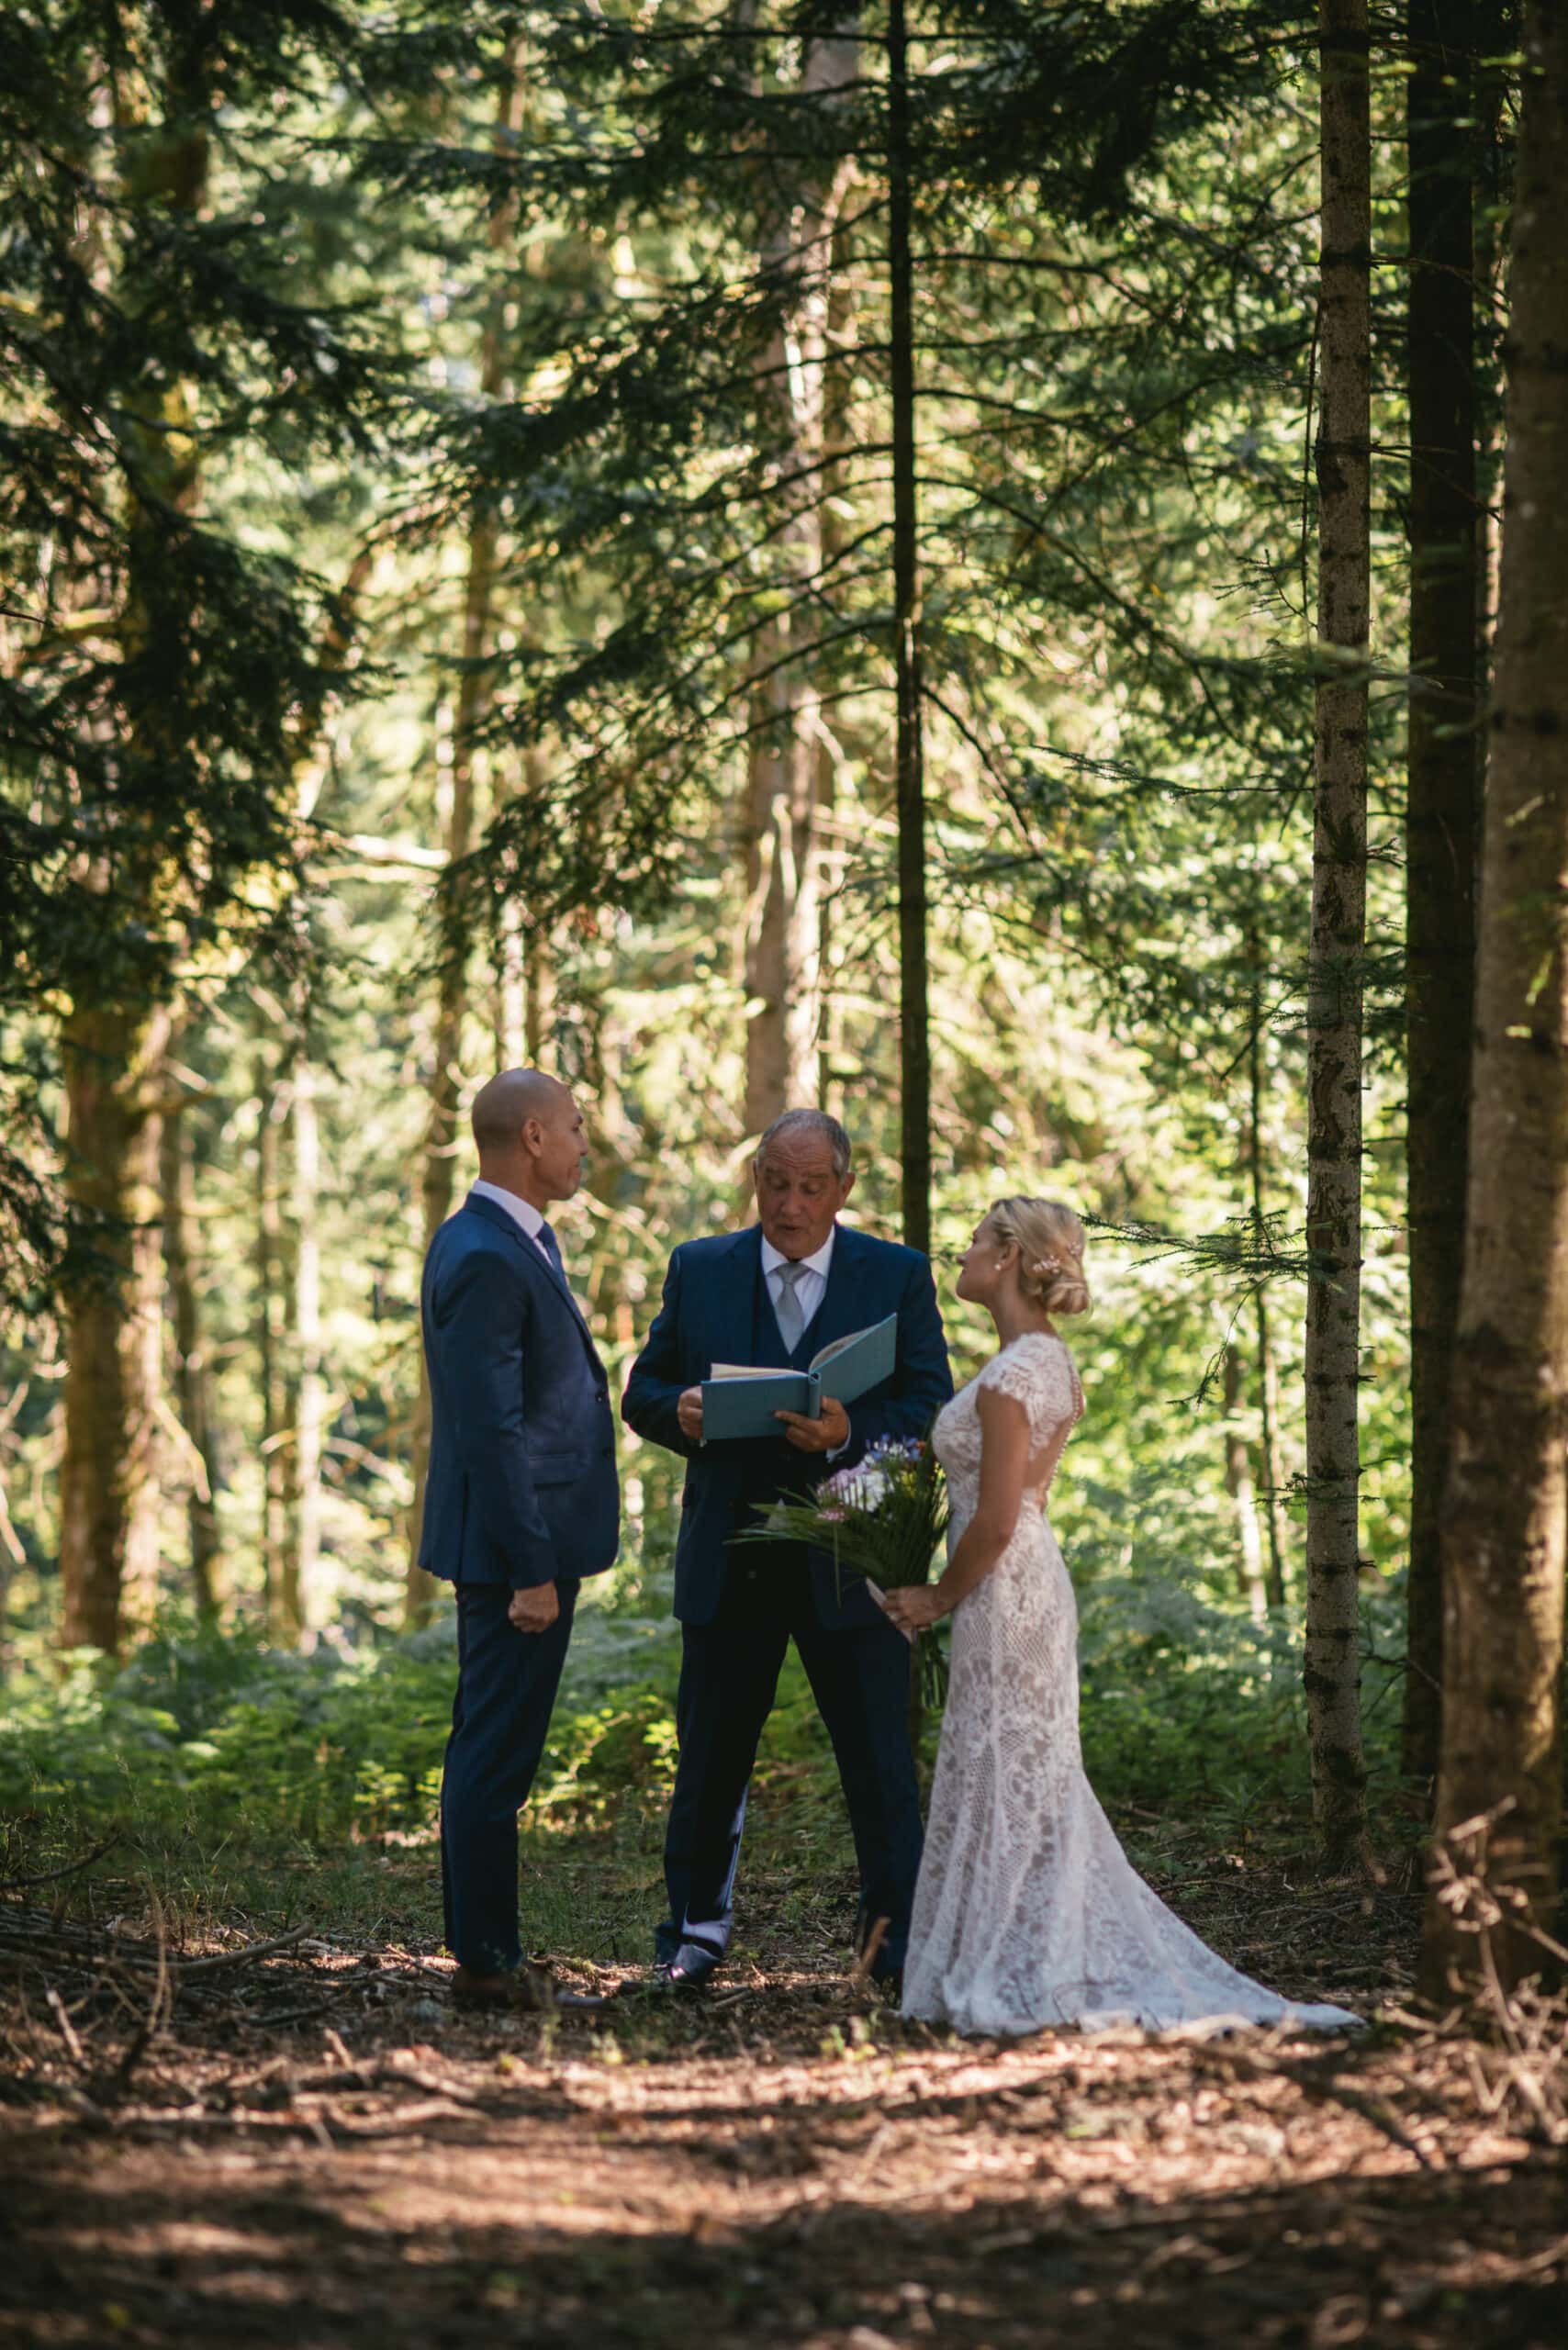 Bride and groom exchanging their vows in a forest in Central France